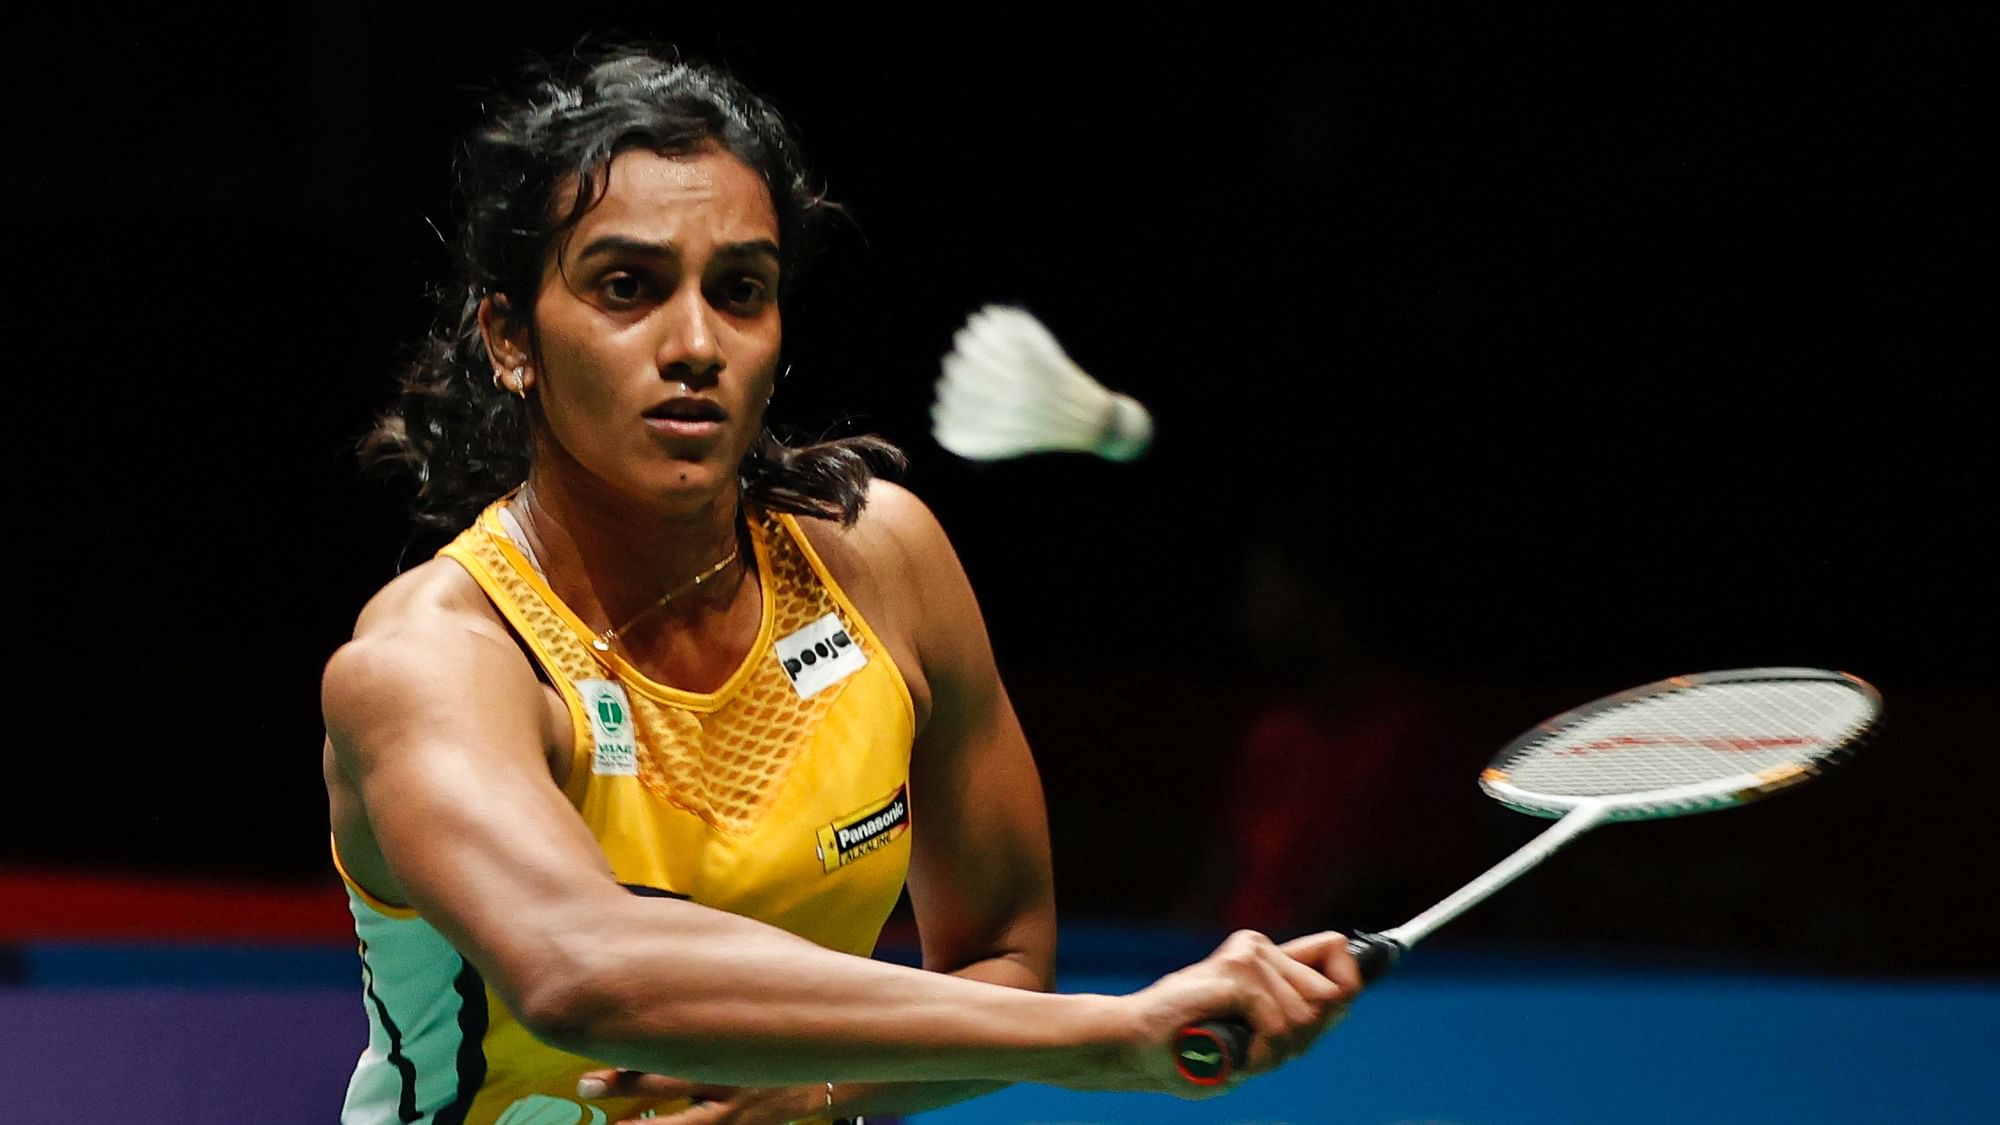 PV Sindhu continued to play the All England despite the Government’s 11 March advisory against Coronavirus.